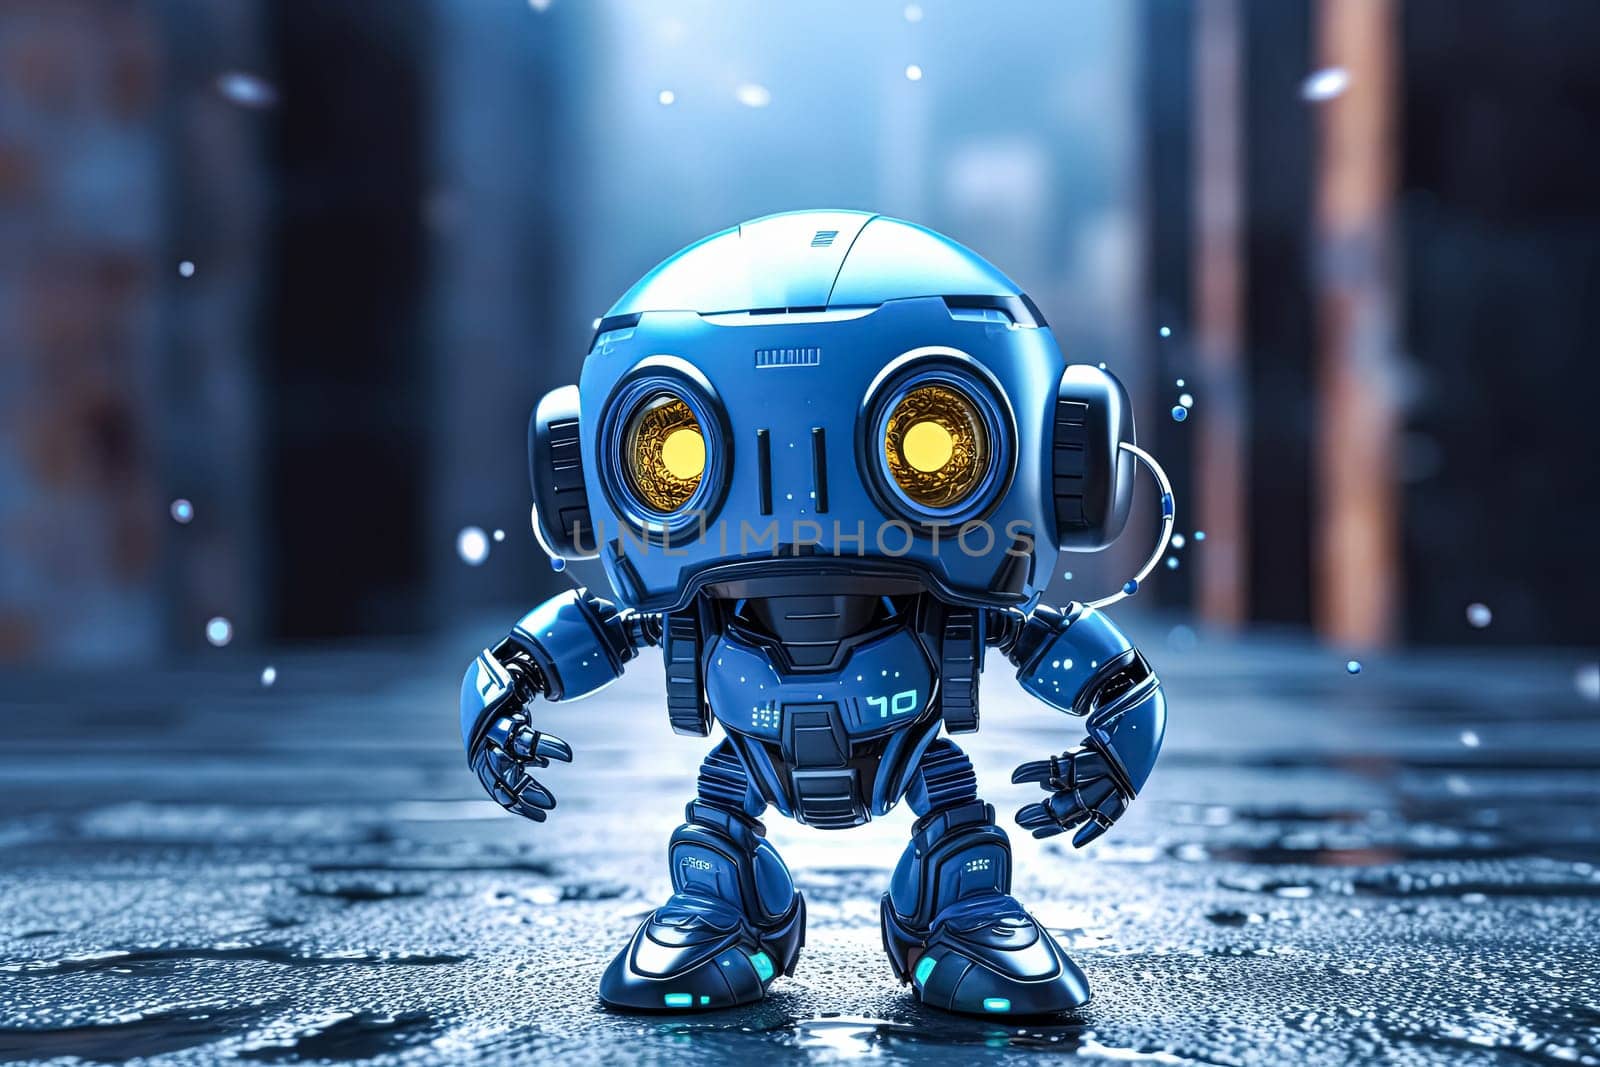 A robot is standing on a wet street. The robot is blue and yellow